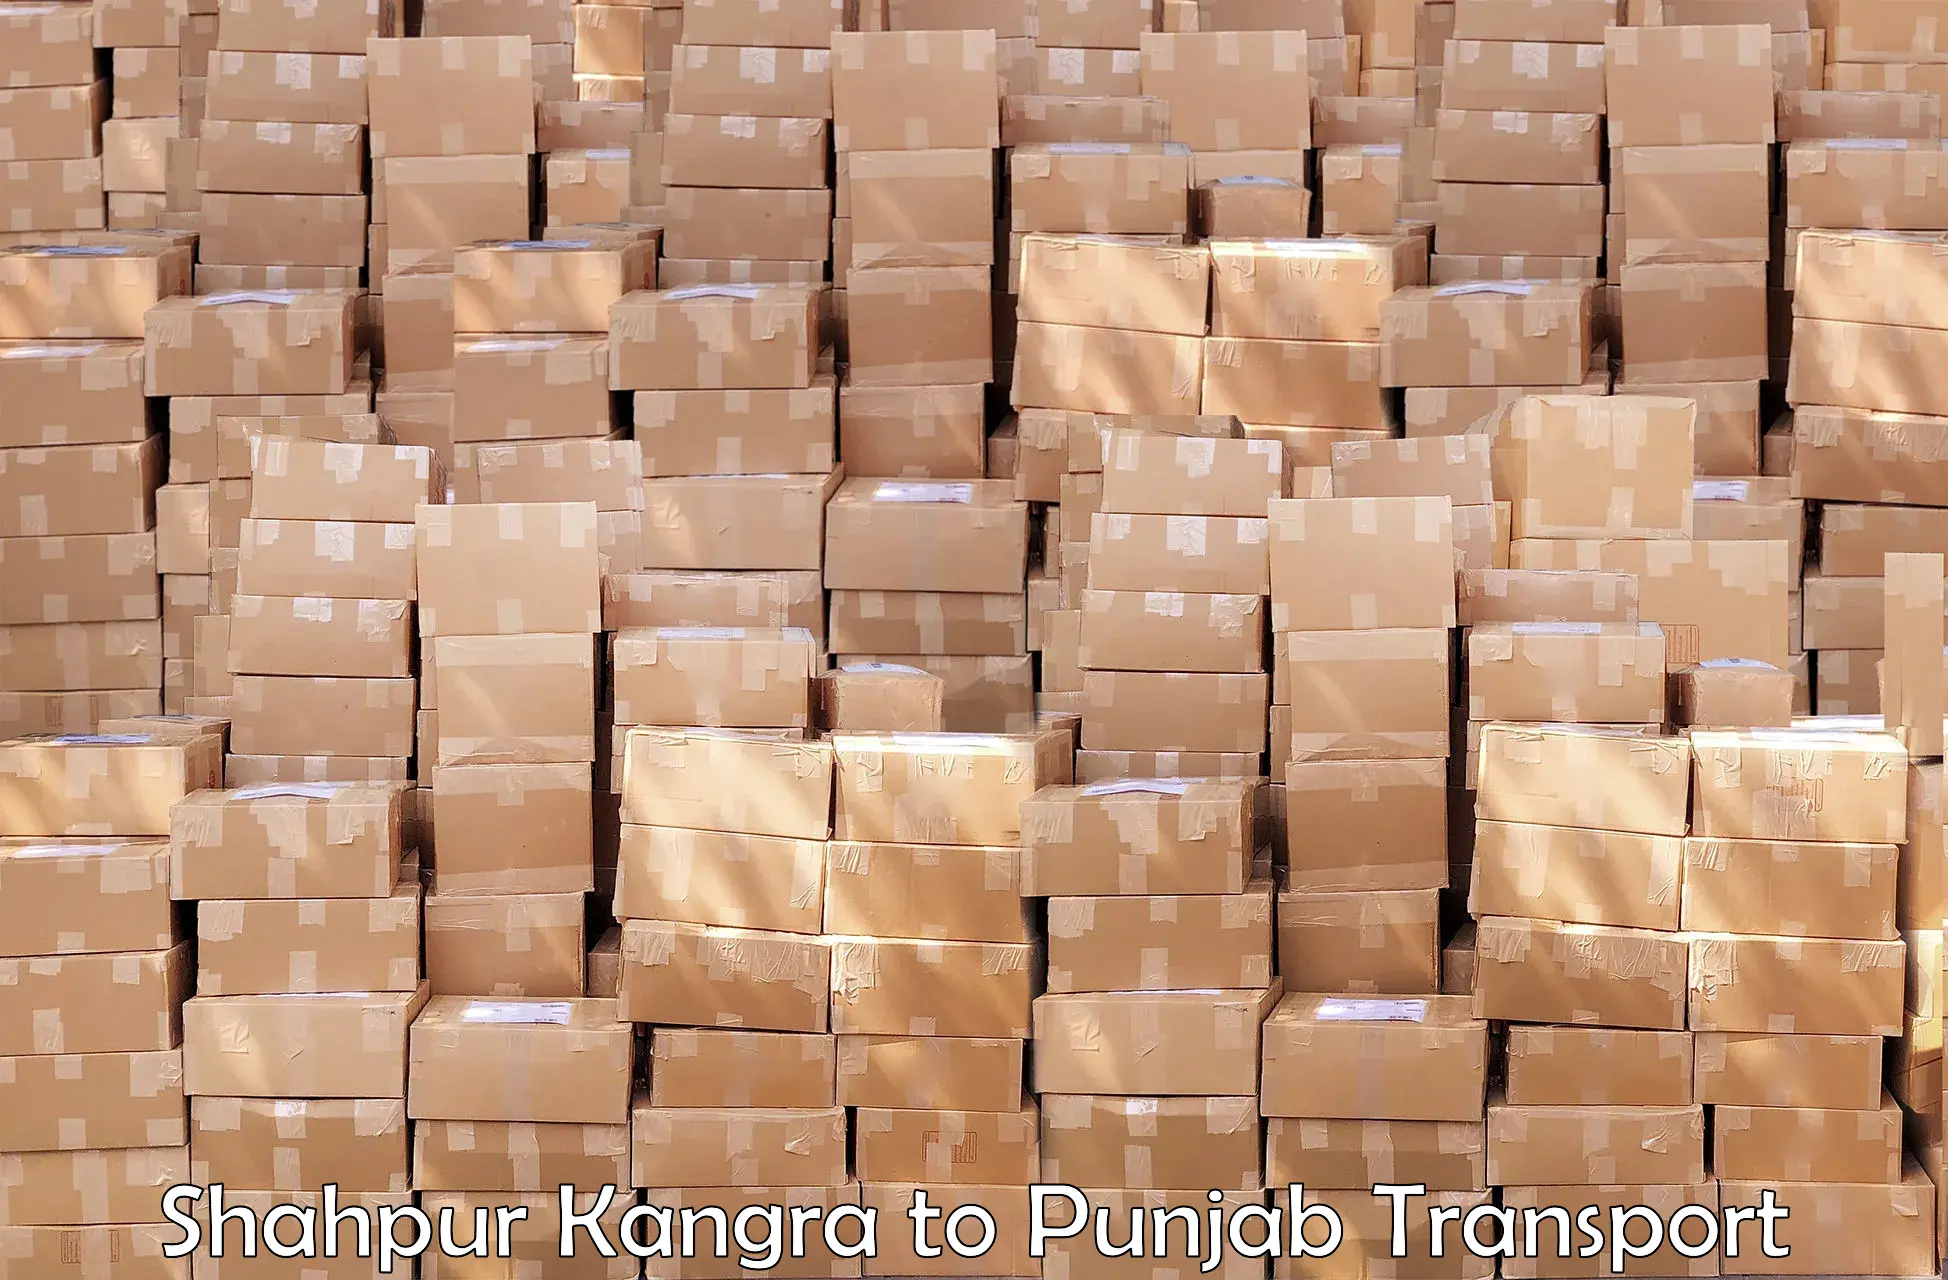 Furniture transport service Shahpur Kangra to Thapar Institute of Engineering and Technology Patiala